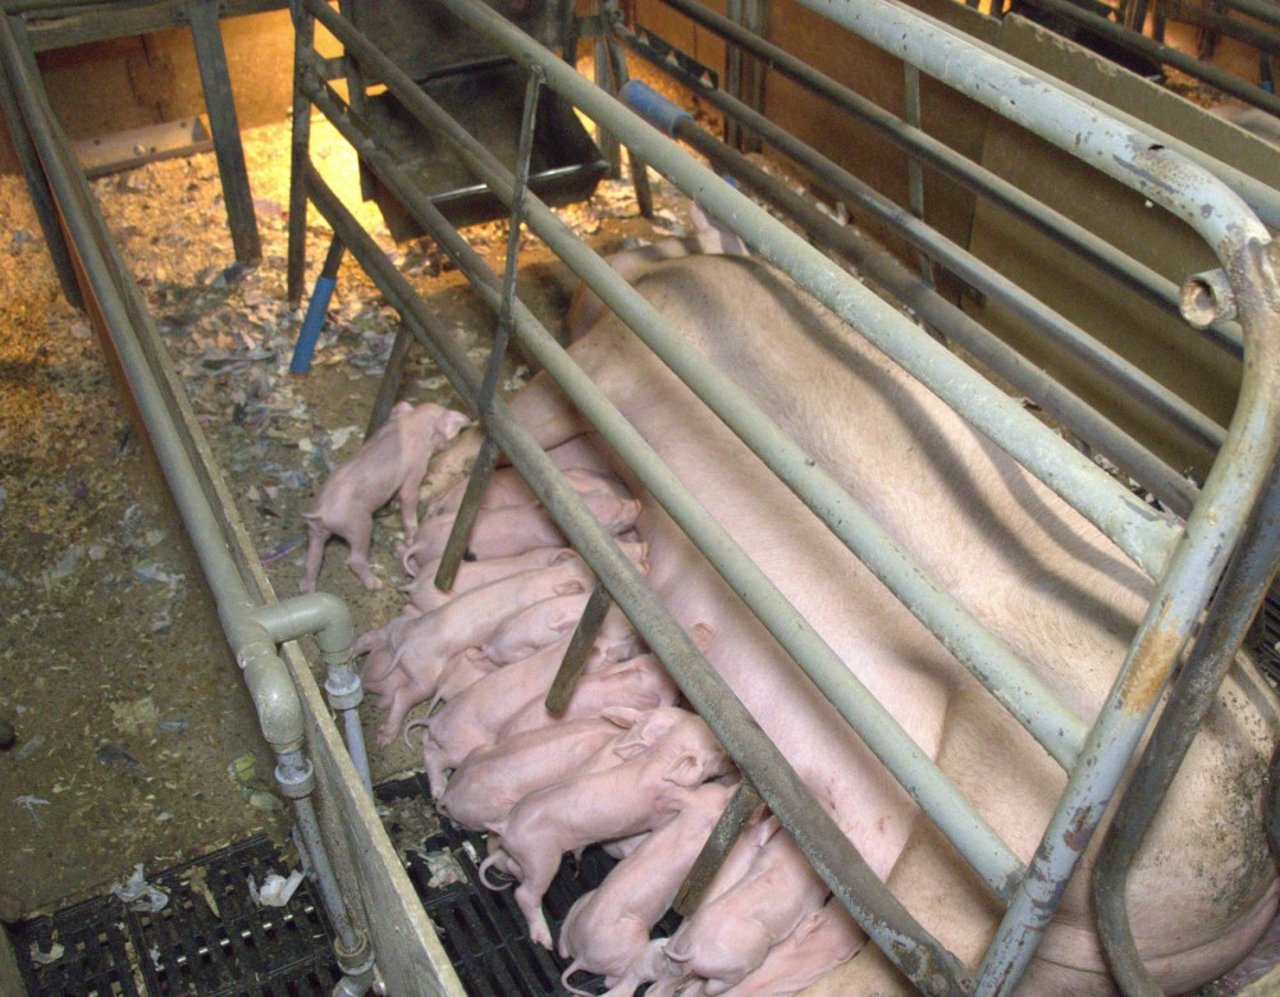 Mother pig and piglets in farrowing crate UK